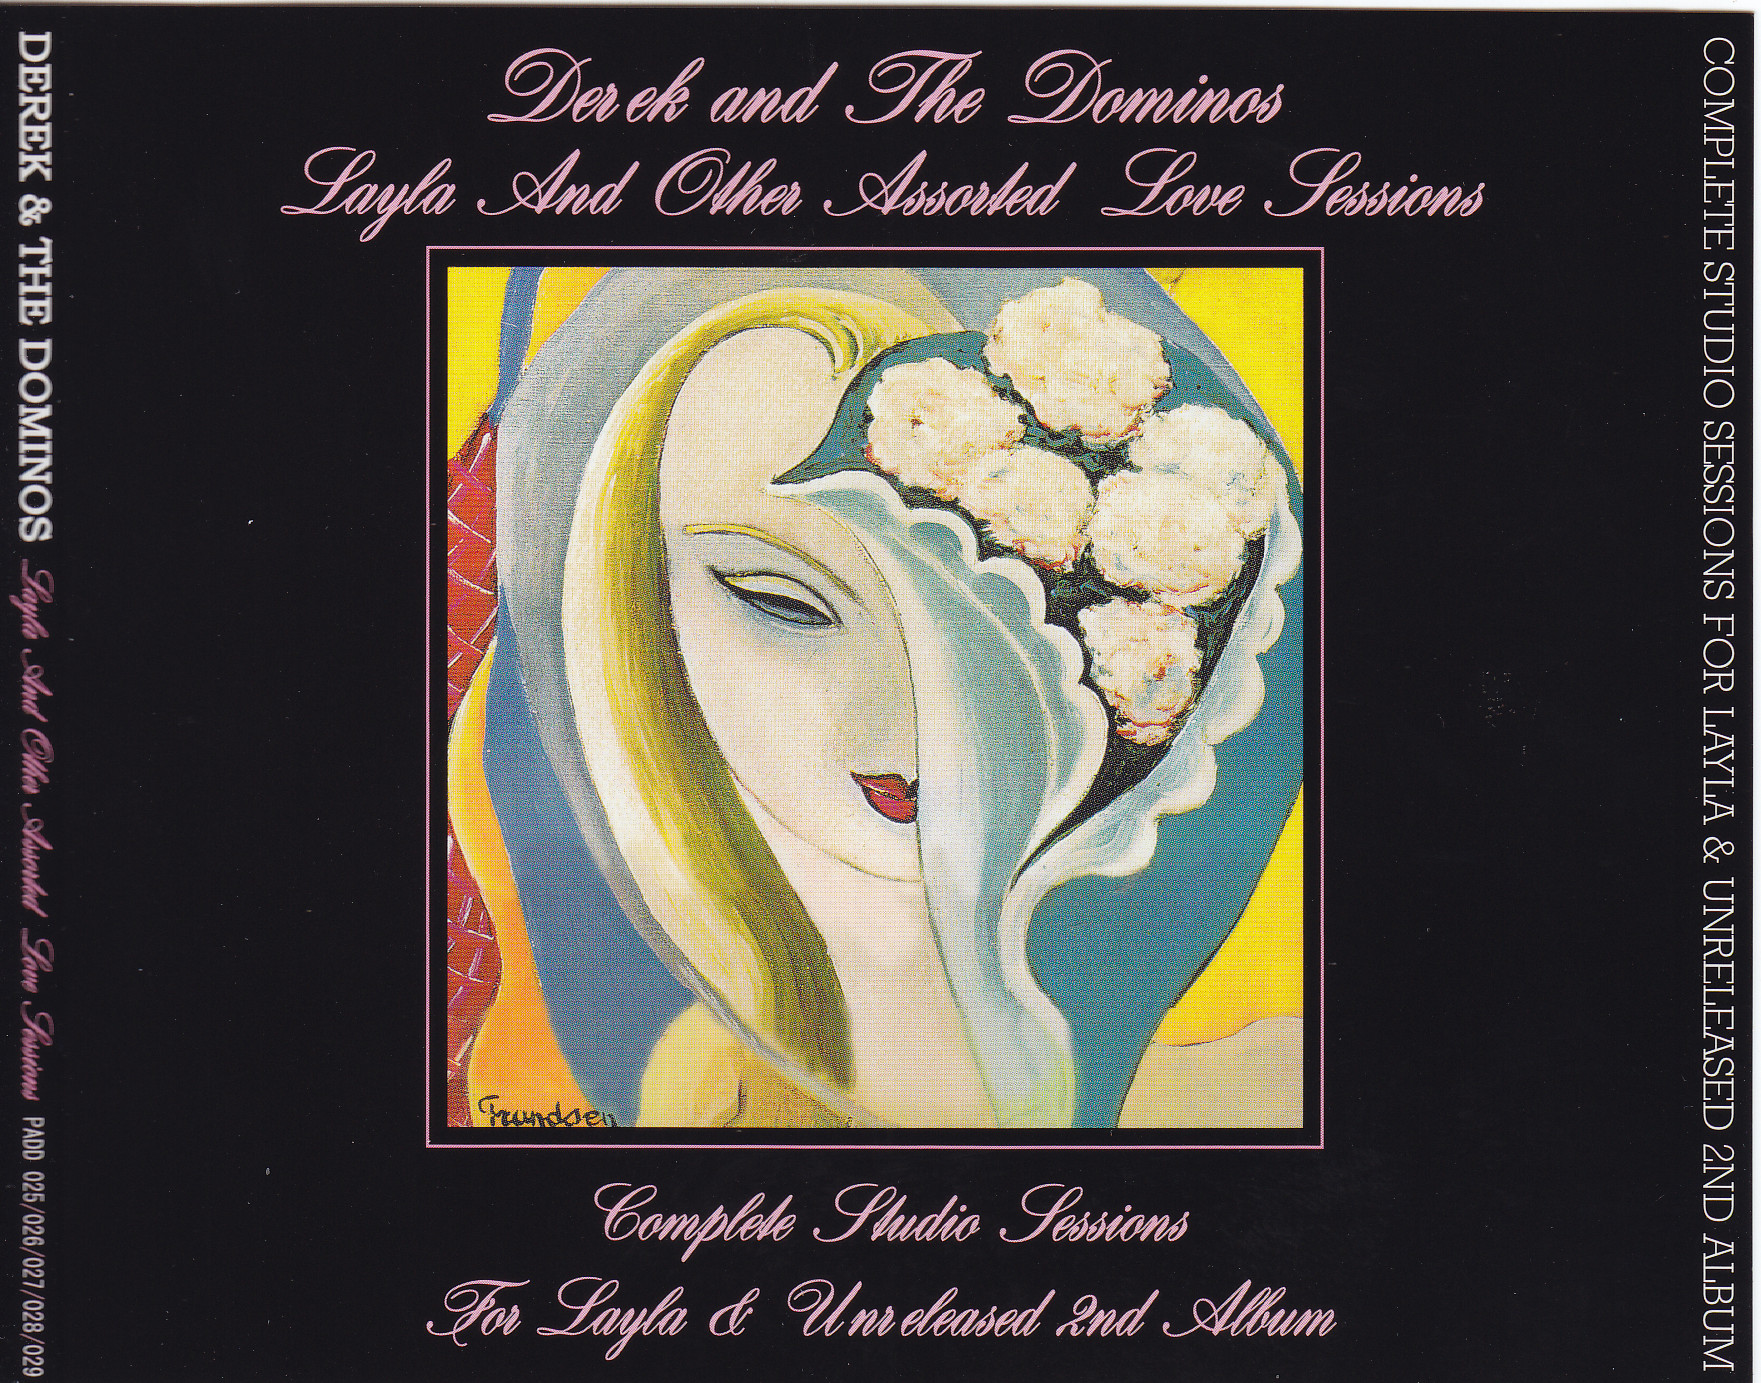 Derek & The Dominos / Layla And Other Assorted Love Sessions / 5CD 